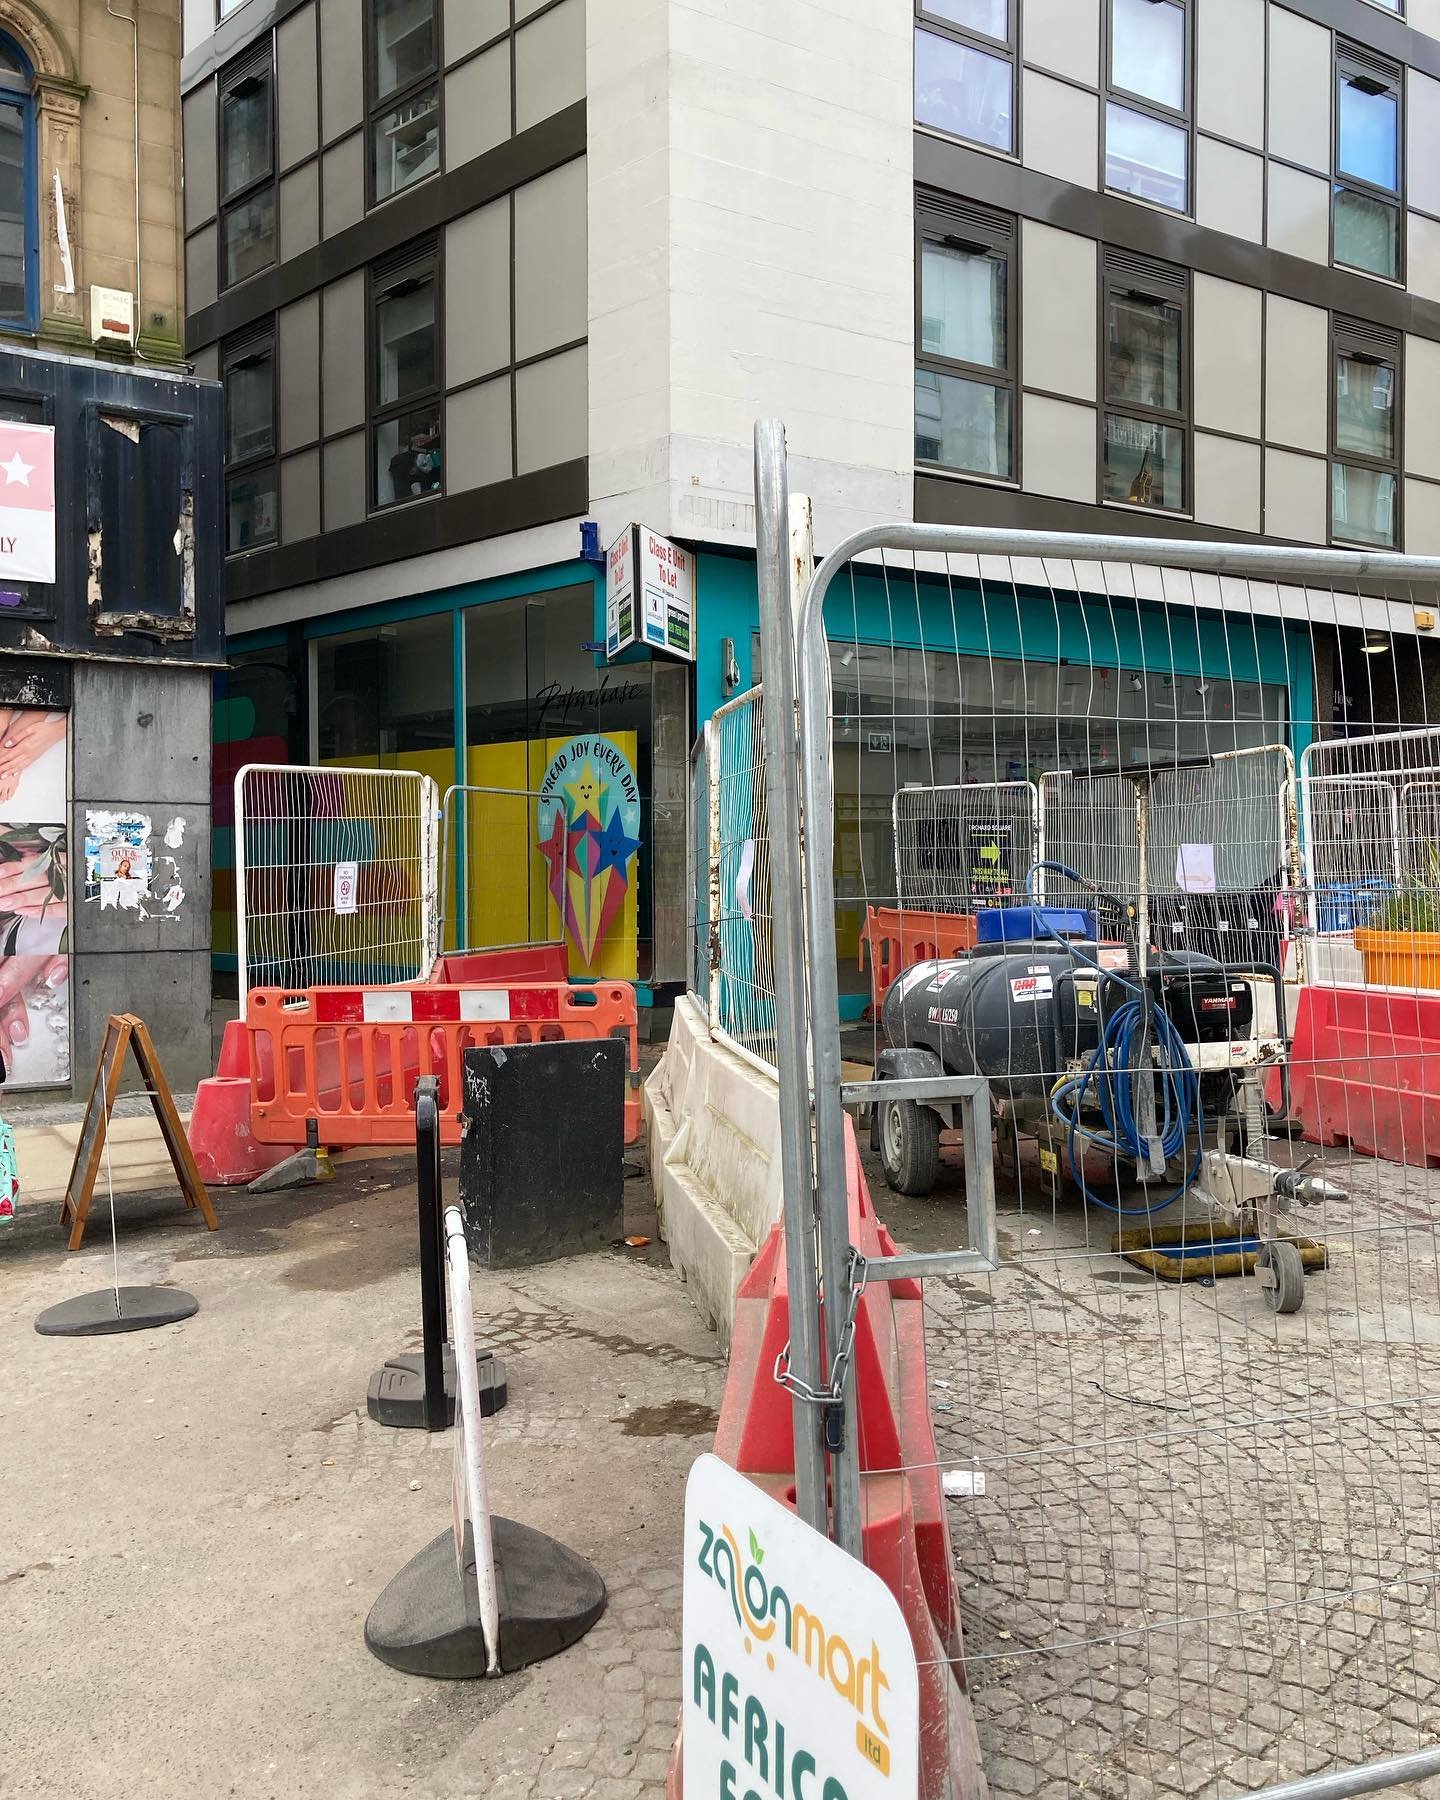 FEAR NOT GOOD PEOPLE OF SHEFFIELD!

The works on Fargate are now around the entrance to Chapel Walk in a Major Way today but you CAN still get to us from Fargate, past the barriers. Alternatively, the end of Chapel Walk opposite the Crucible is total